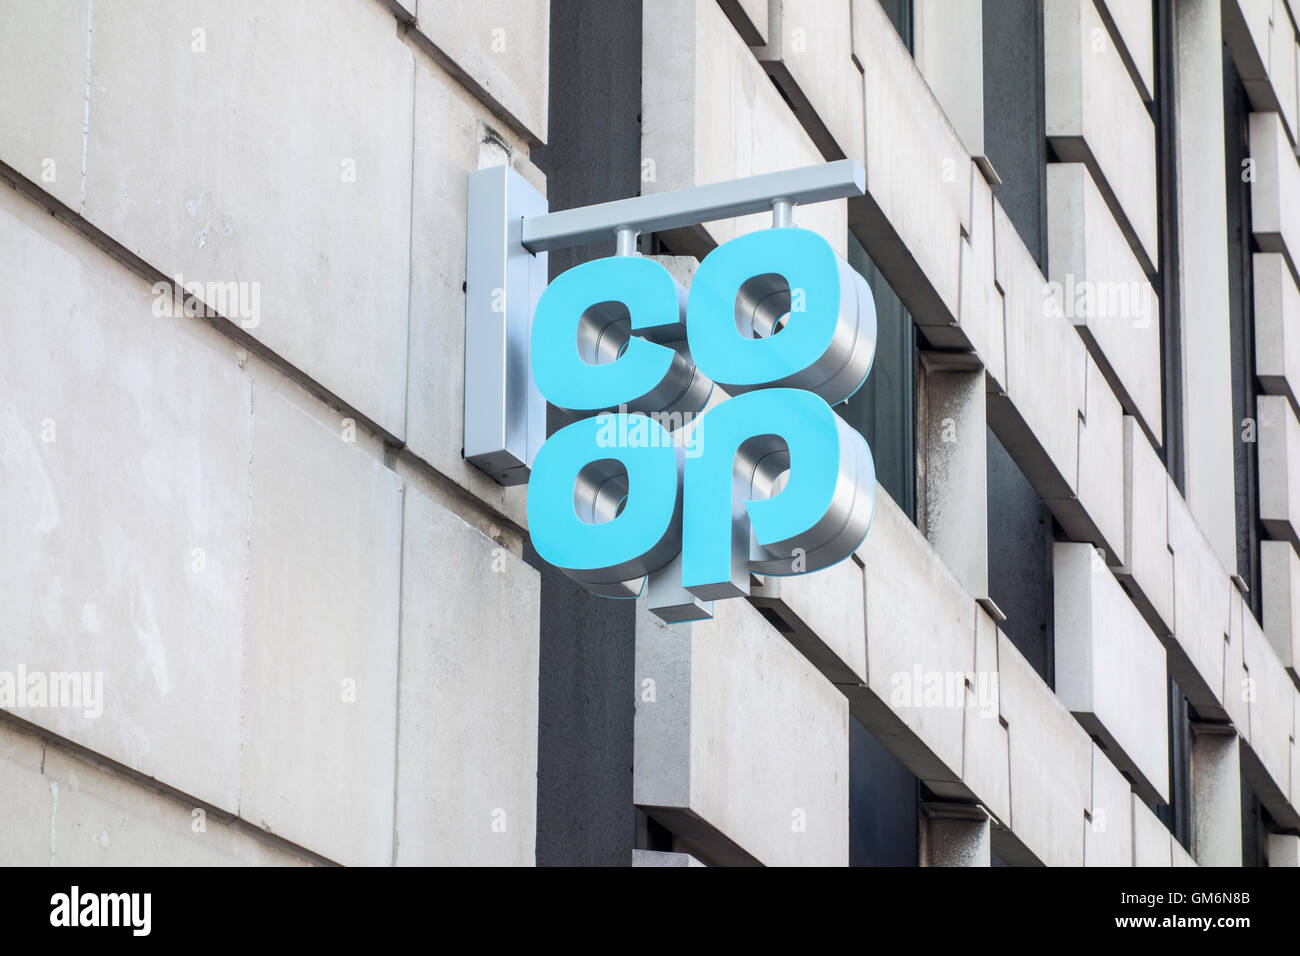 Coop bank branch sign, London Stock Photo